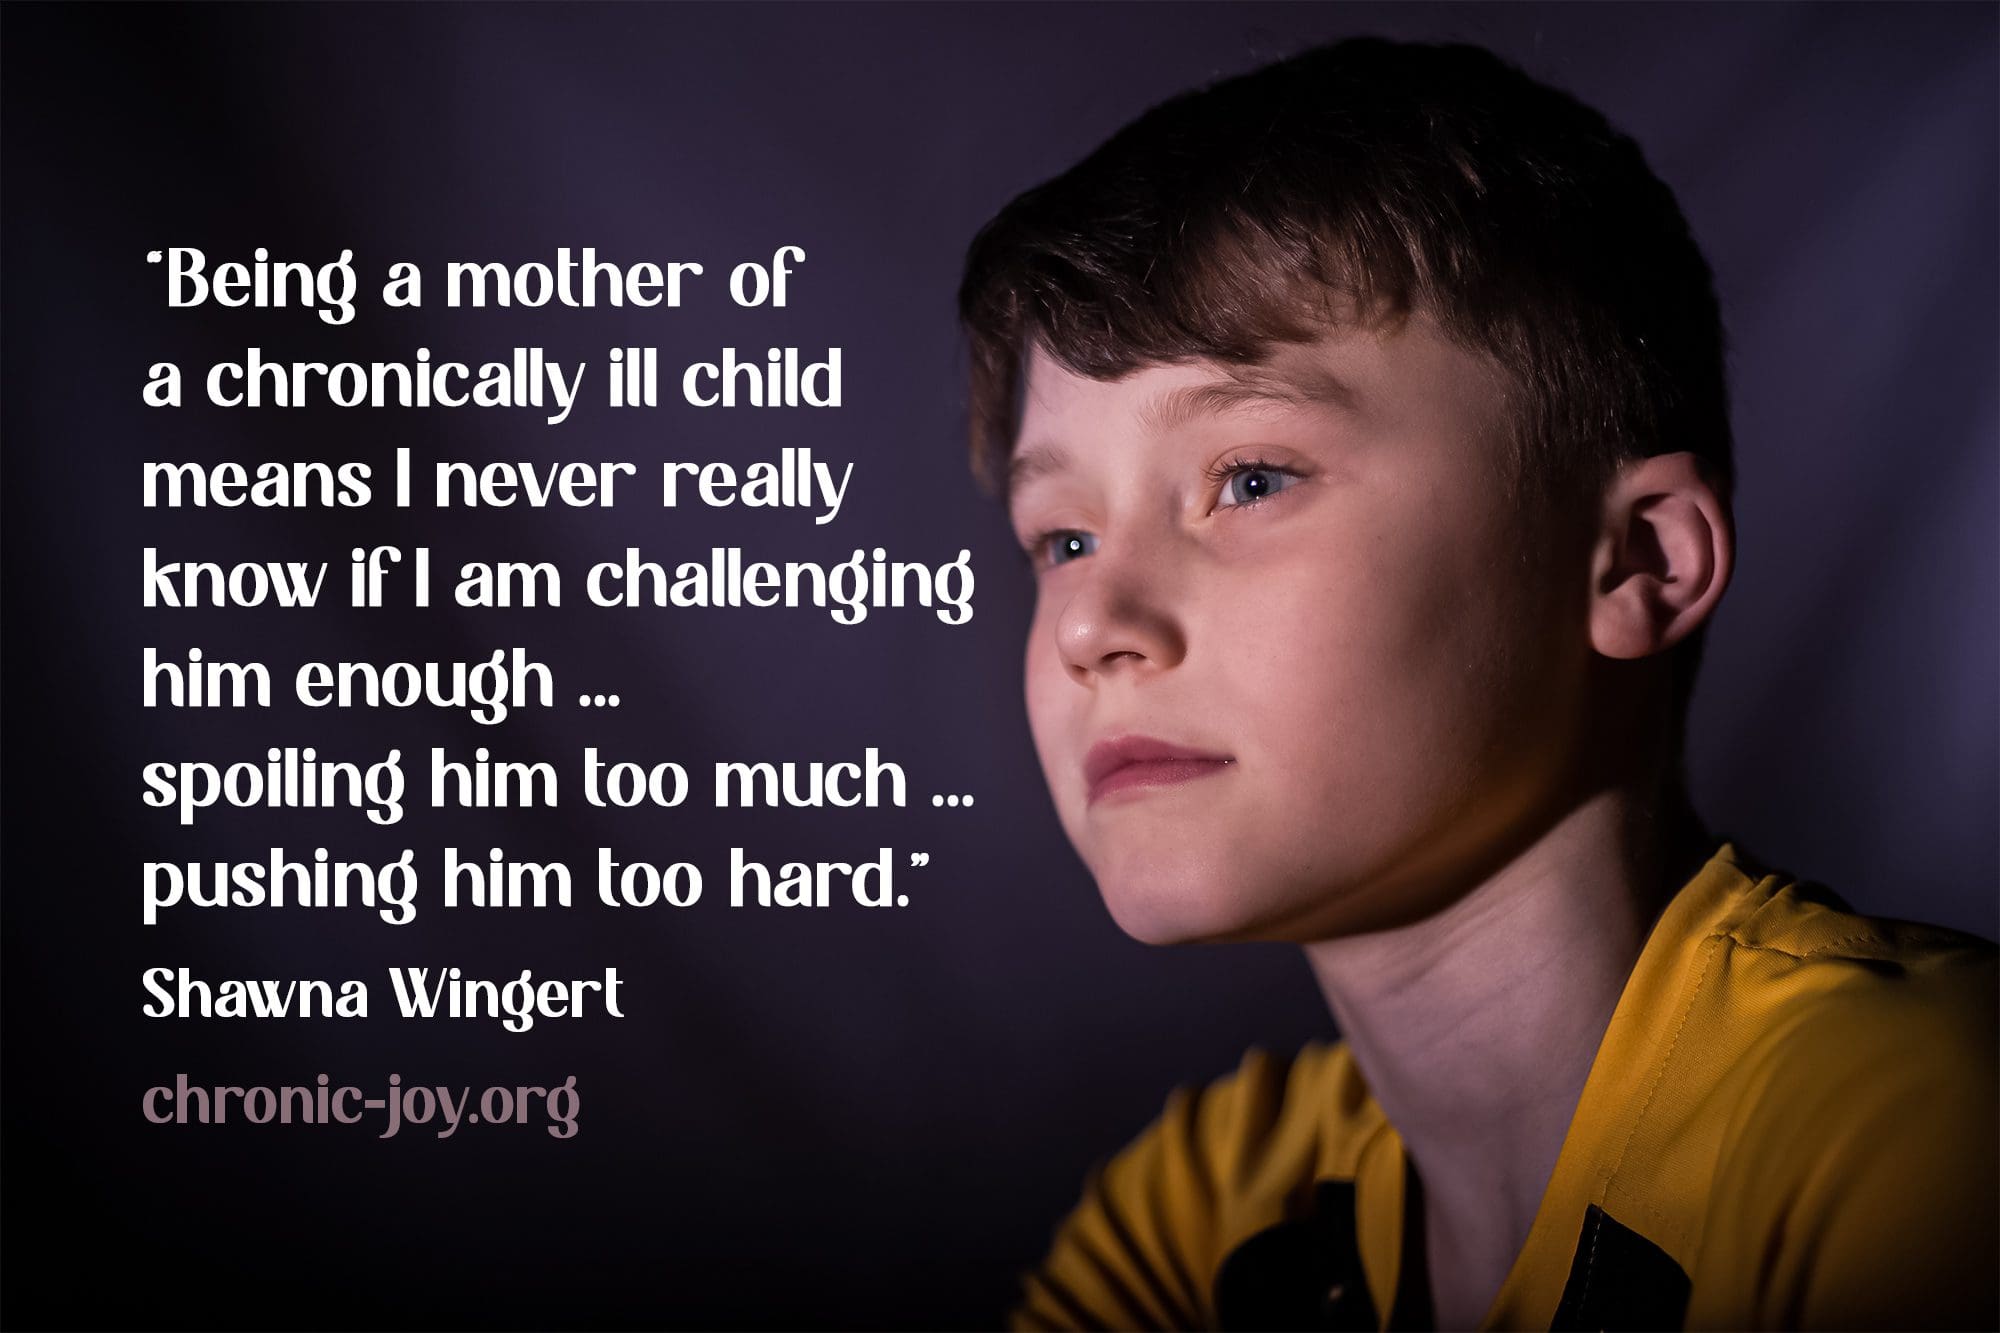 “Being a mother of a chronically ill child means I never really know if I am challenging him enough ... spoiling him too much ... pushing him too hard.” Shawna Wingert